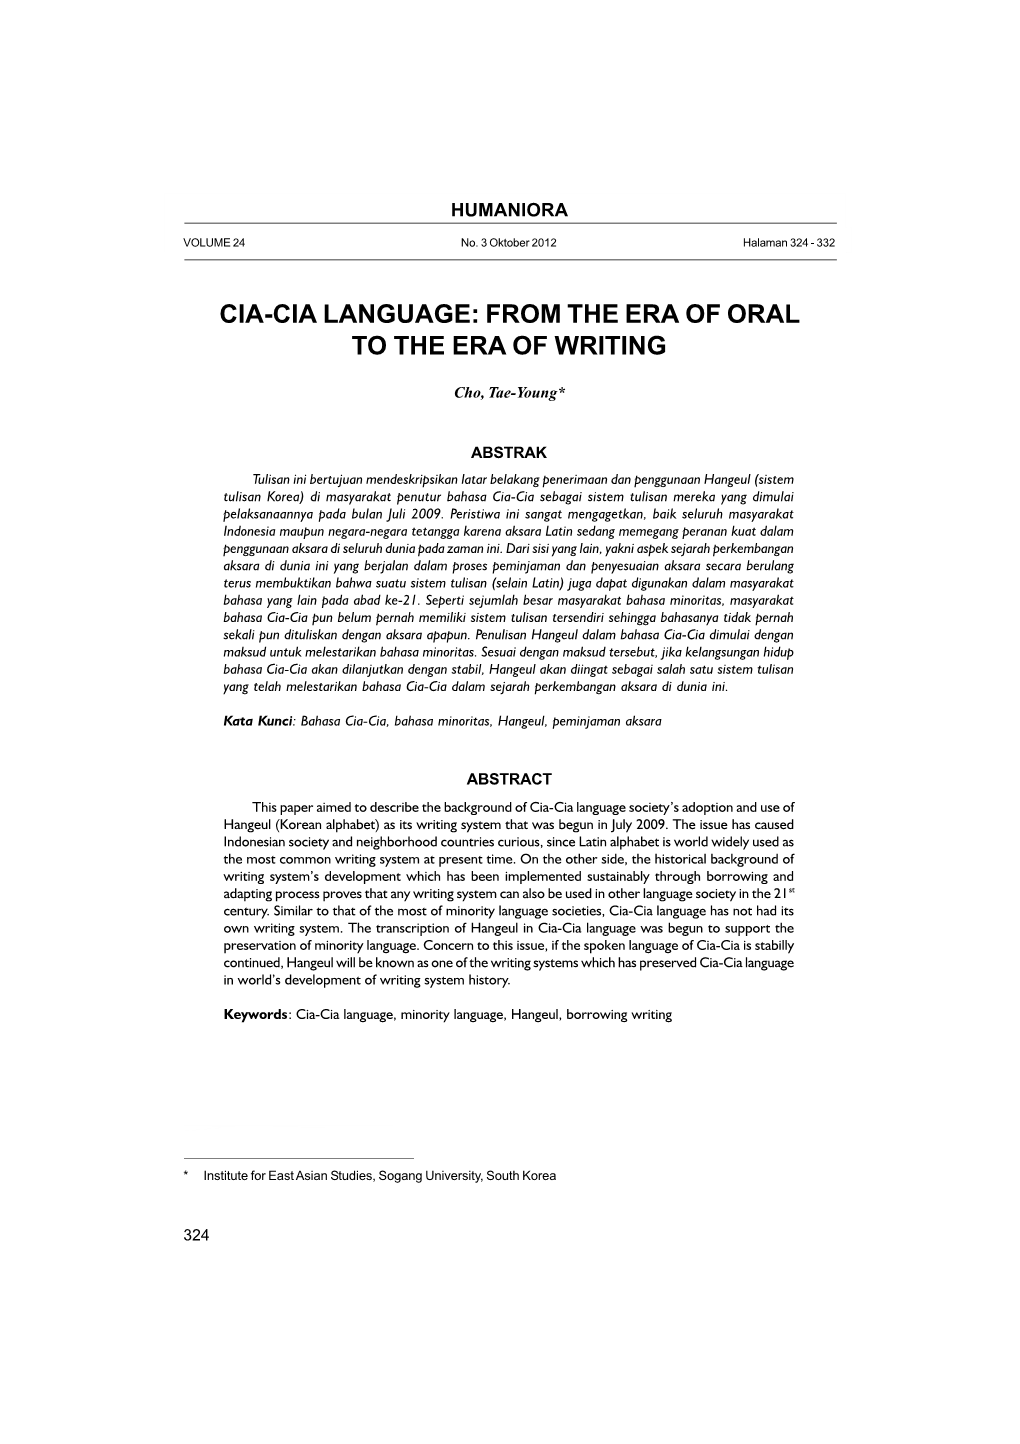 Cia-Cia Language: from the Era of Oral to the Era of Writing